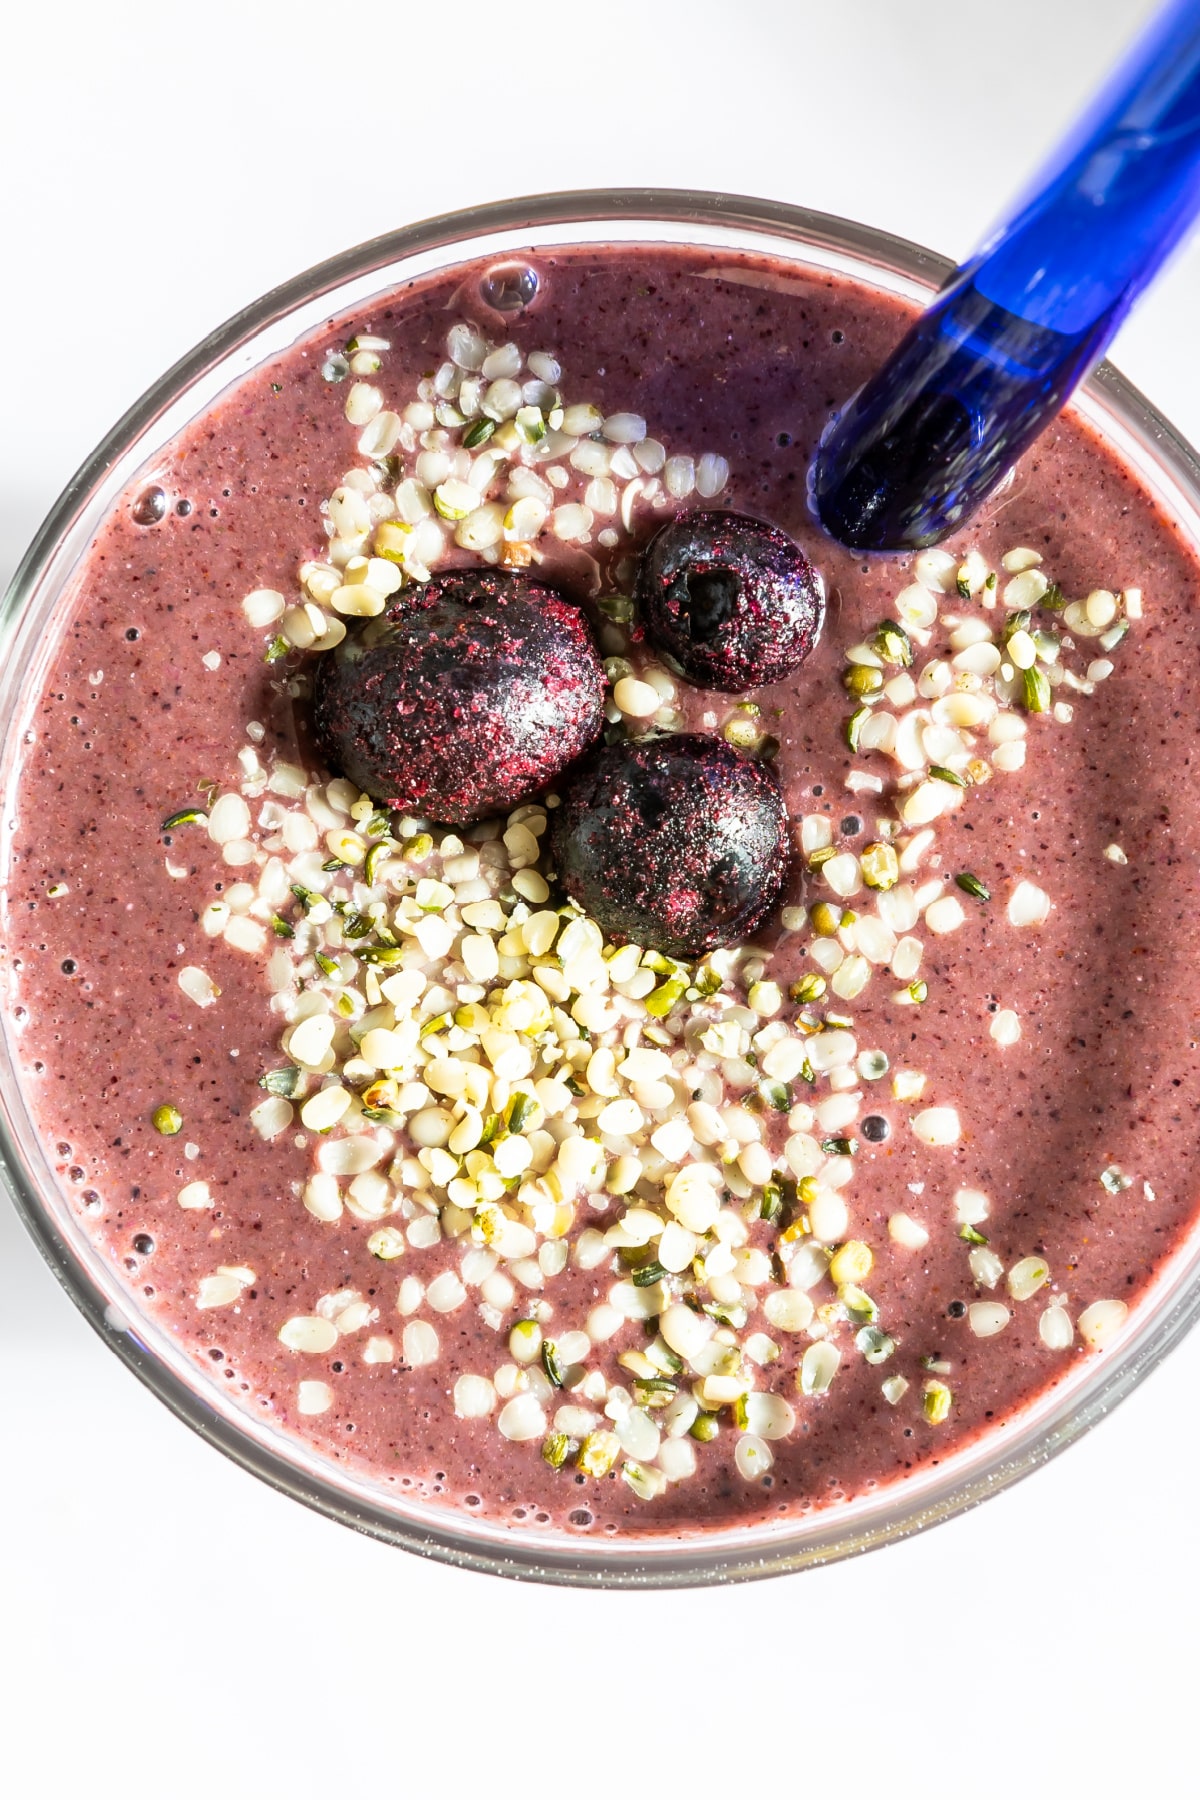 Overhead view of purple blueberry smoothie in pint glass topped with frozen blueberries and hemp seeds.